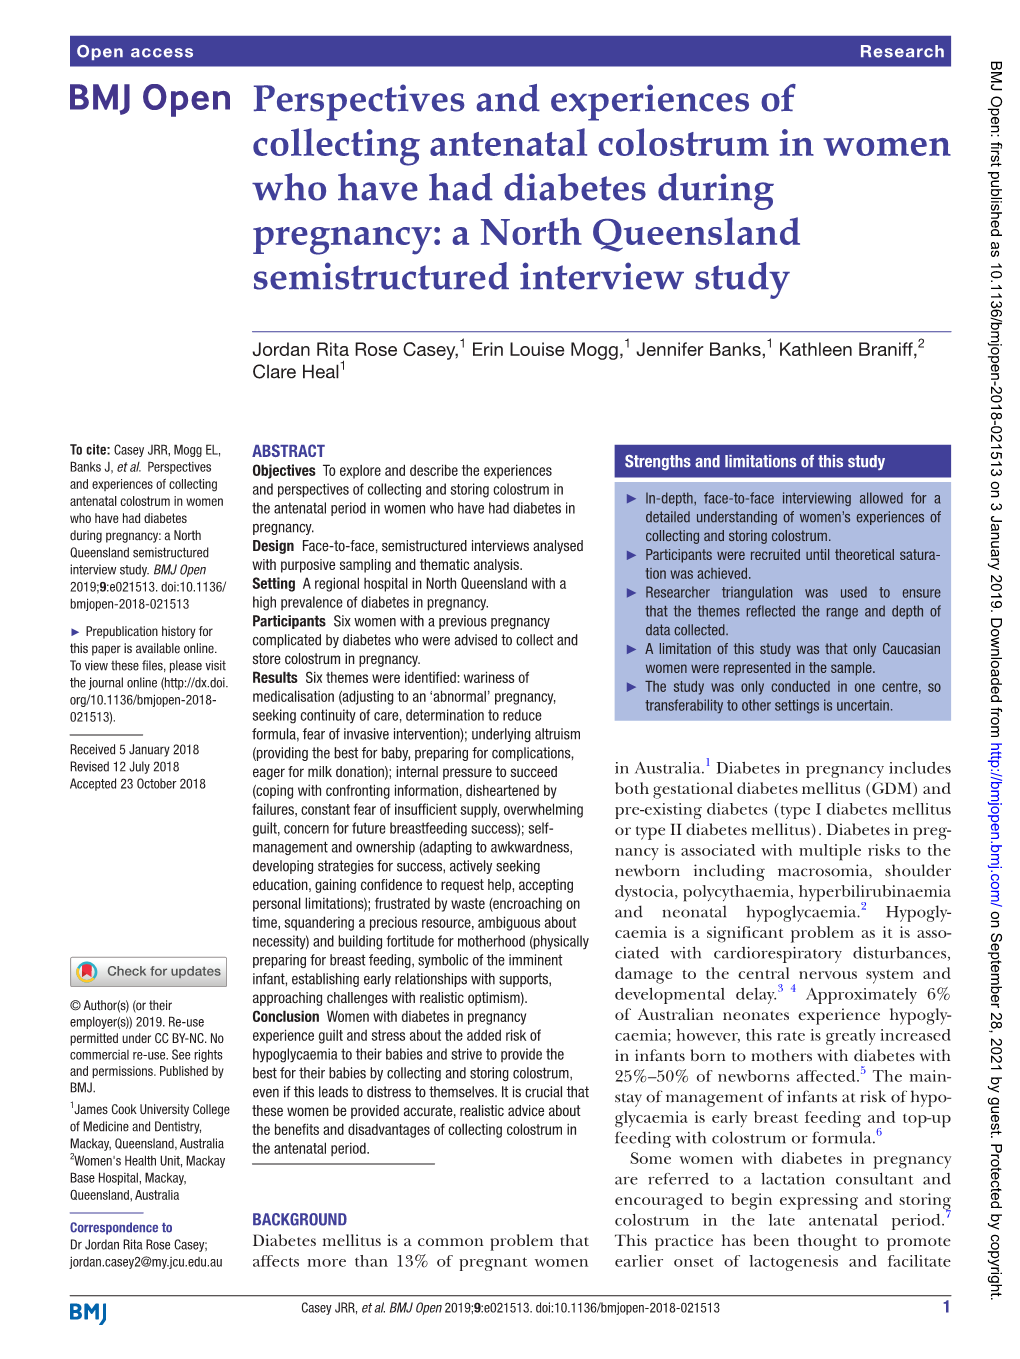 Perspectives and Experiences of Collecting Antenatal Colostrum in Women Who Have Had Diabetes During Pregnancy: a North Queensland Semistructured Interview Study